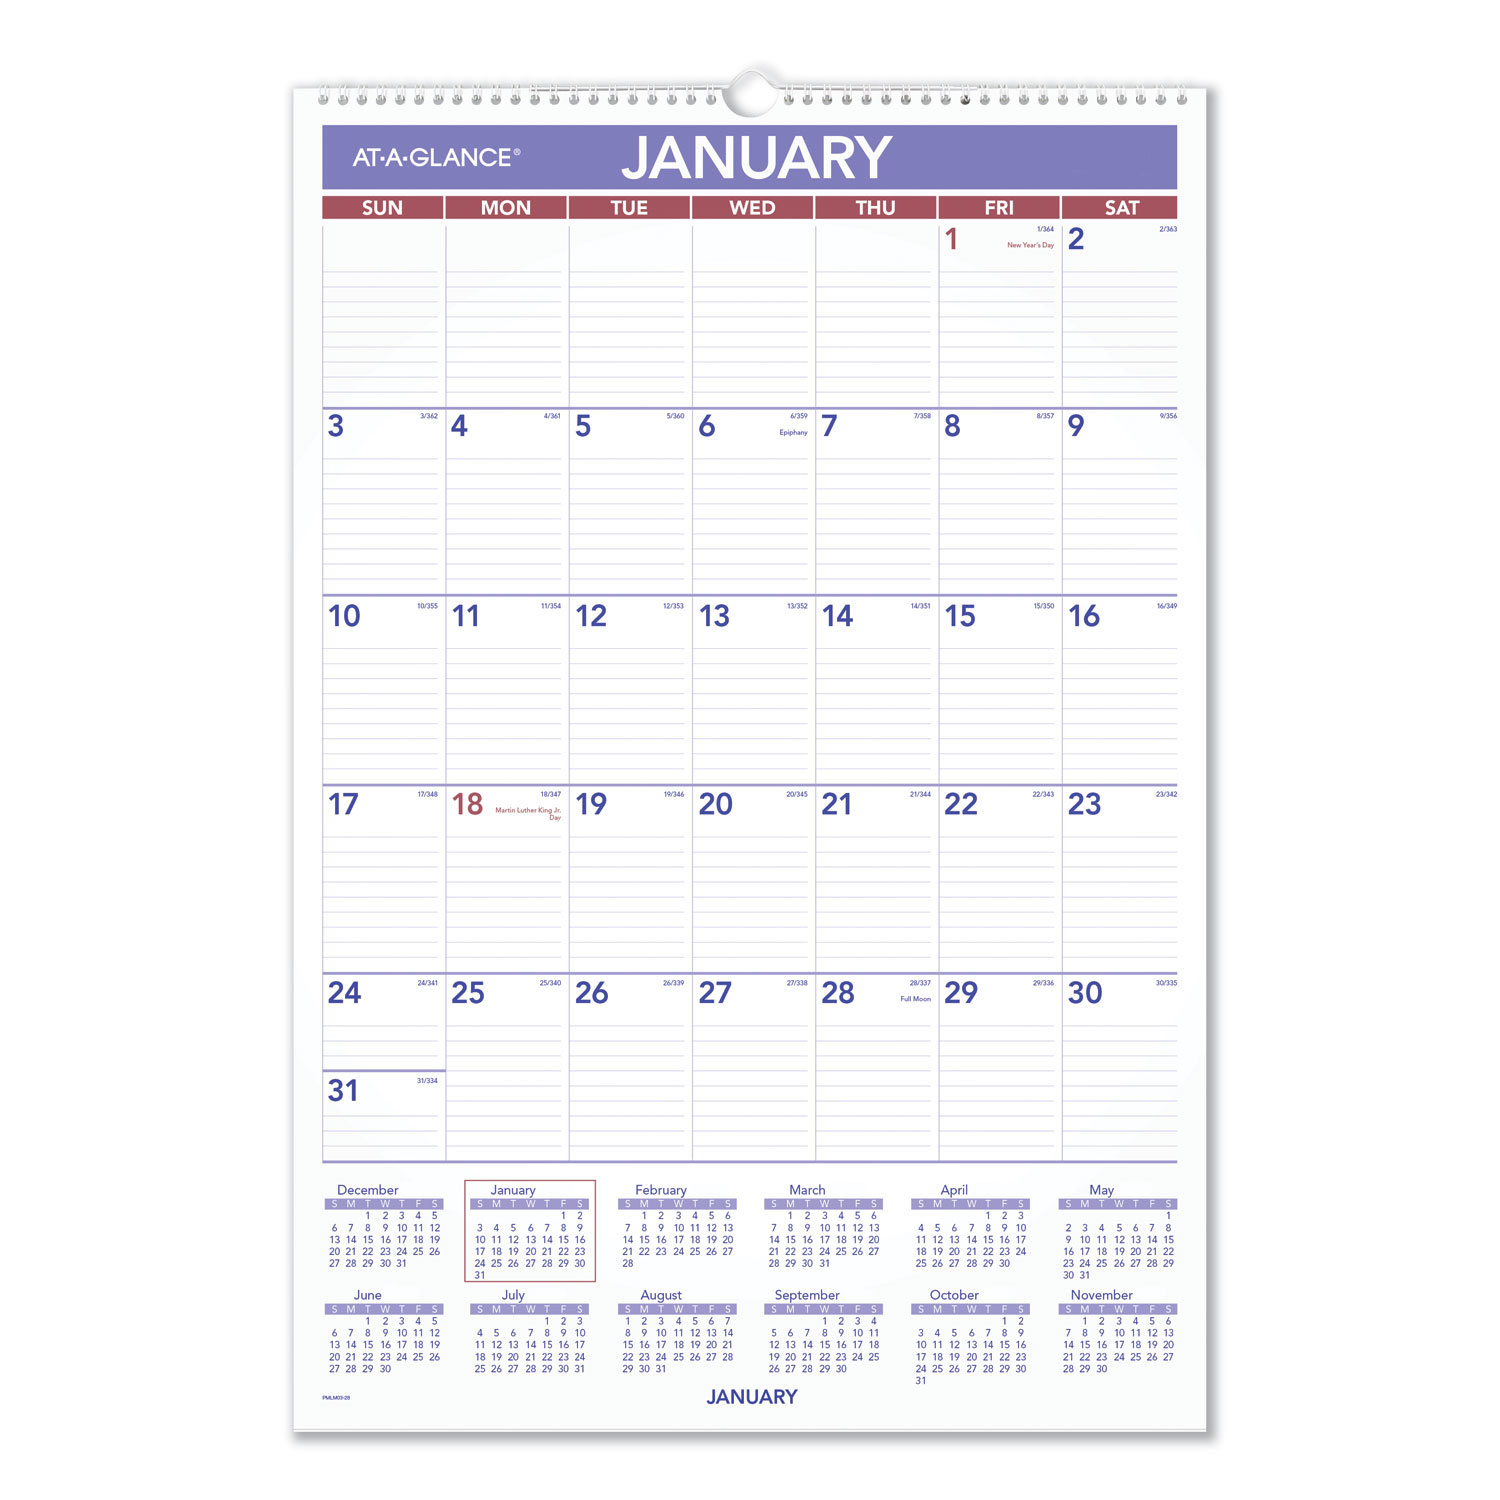  AT-A-GLANCE PMLM03-28 Erasable Wall Calendar, 15 1/2 x 22 3/4, White, 2020 (AAGPMLM0328) 